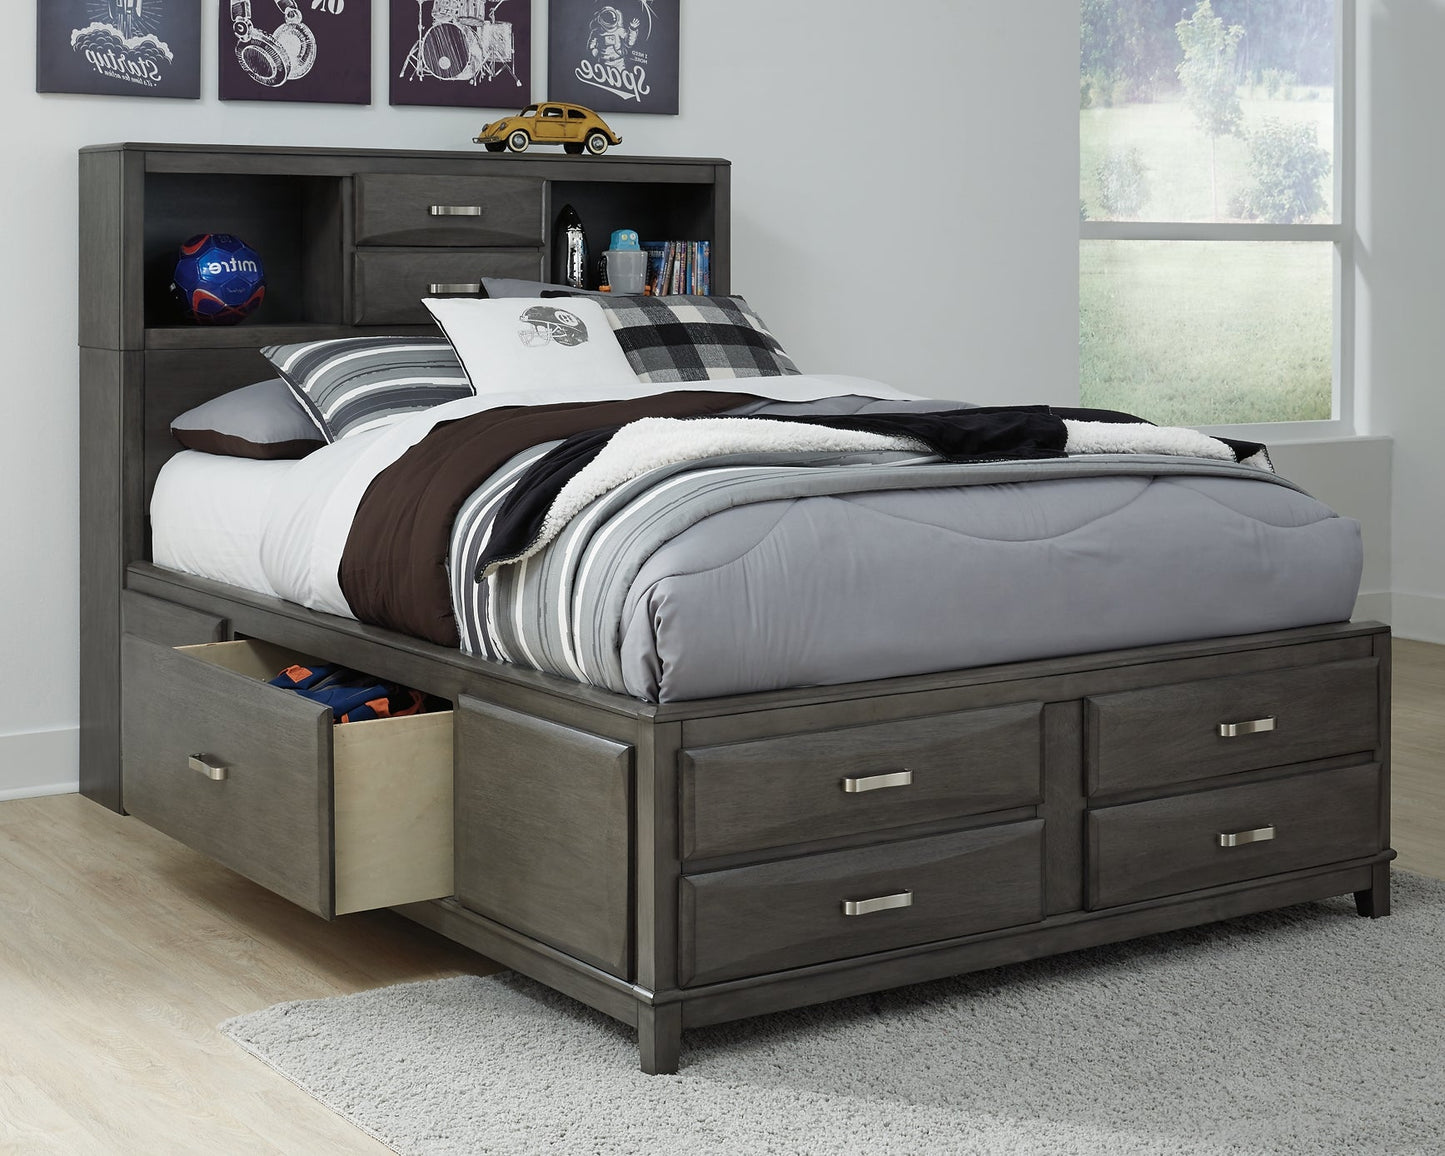 Caitbrook Queen Storage Bed with 8 Drawers at Walker Mattress and Furniture Locations in Cedar Park and Belton TX.